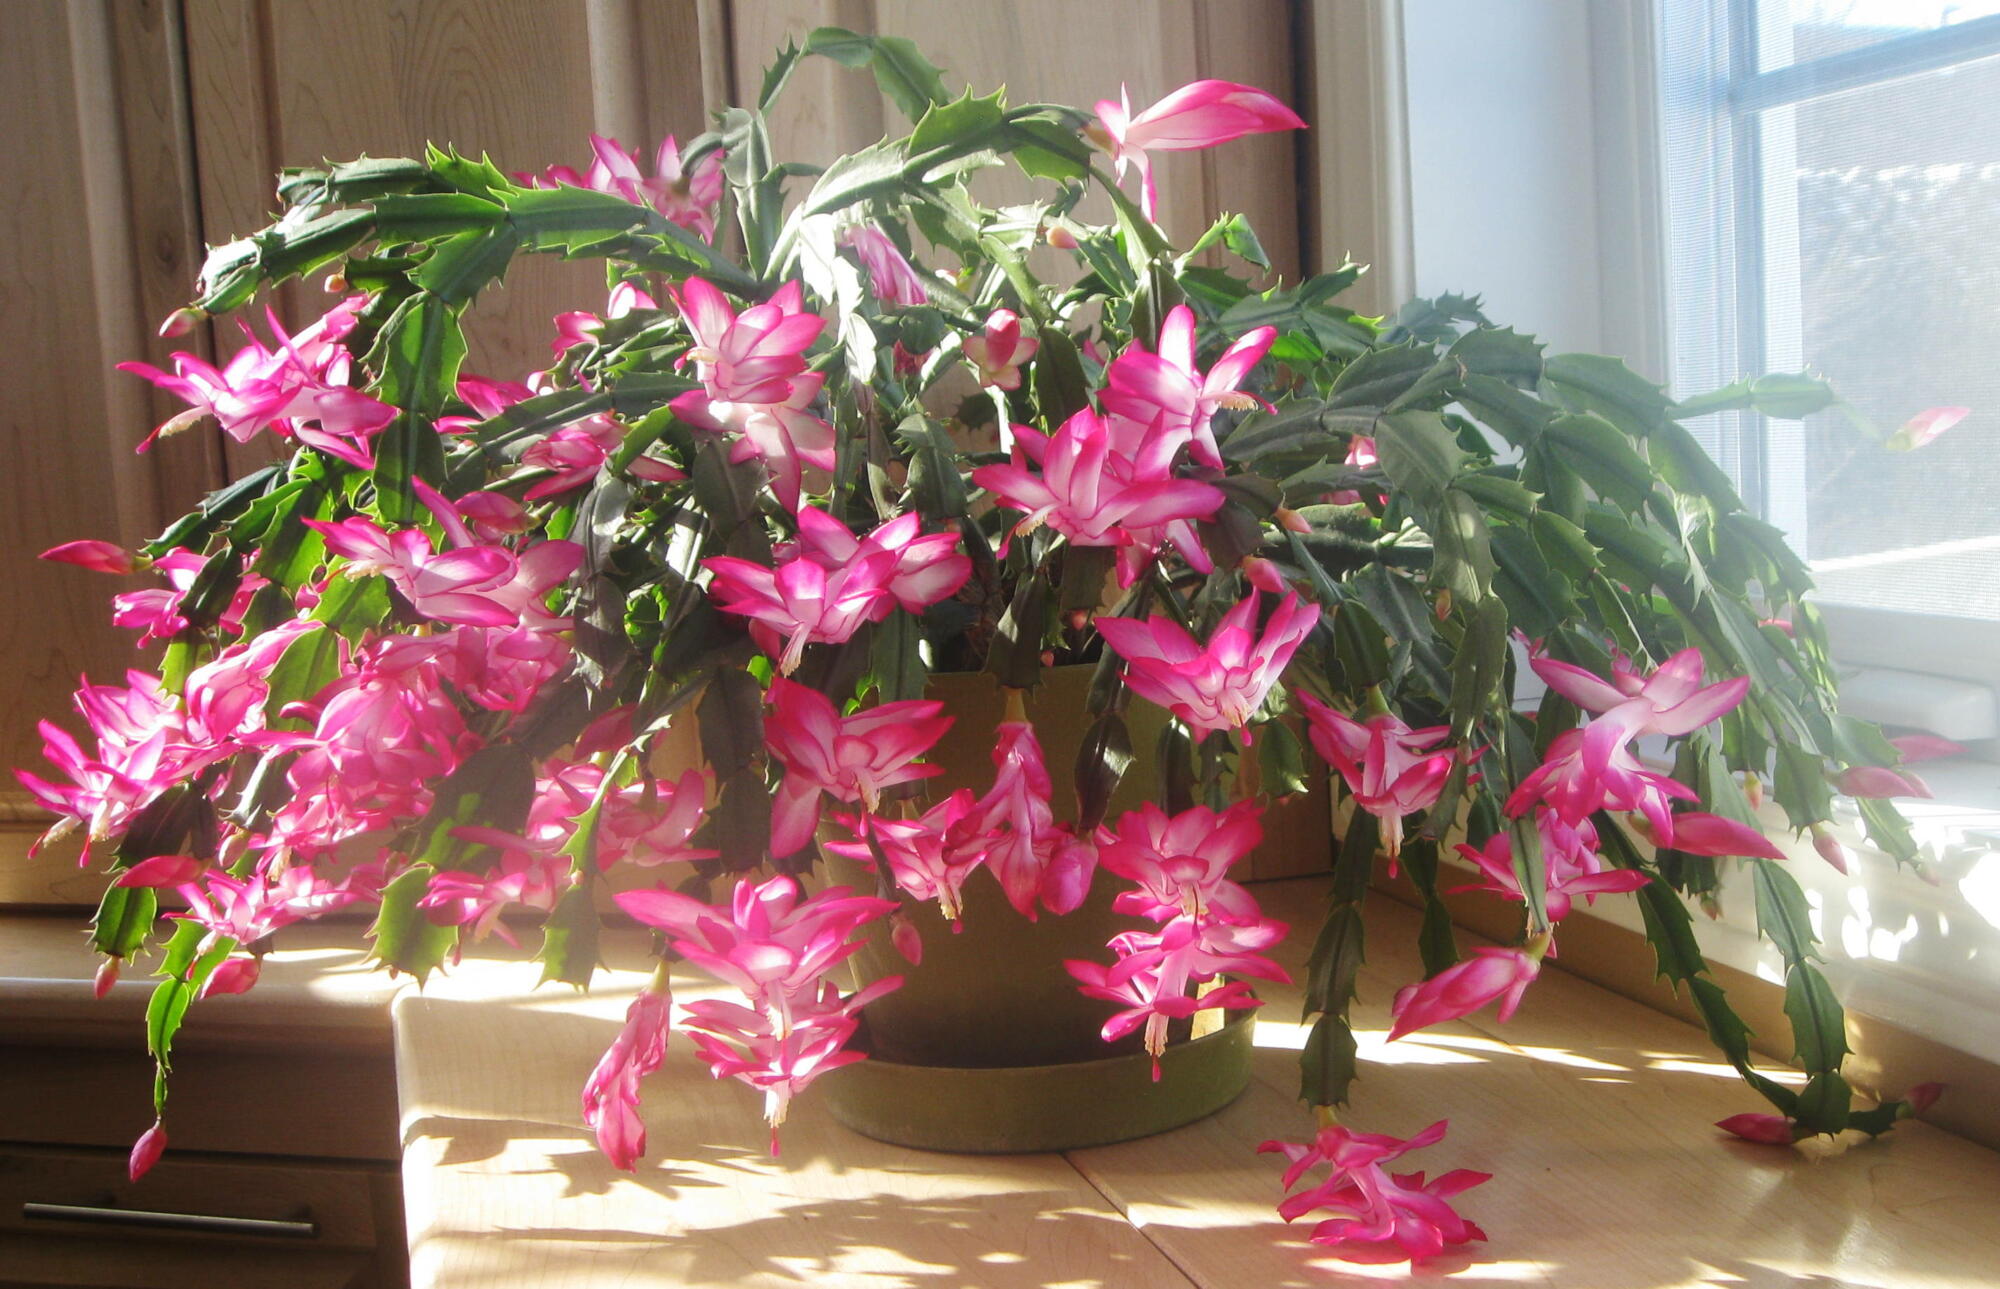 A pink cactus plant on a kitchen counter, Air-Purifying Houseplants.